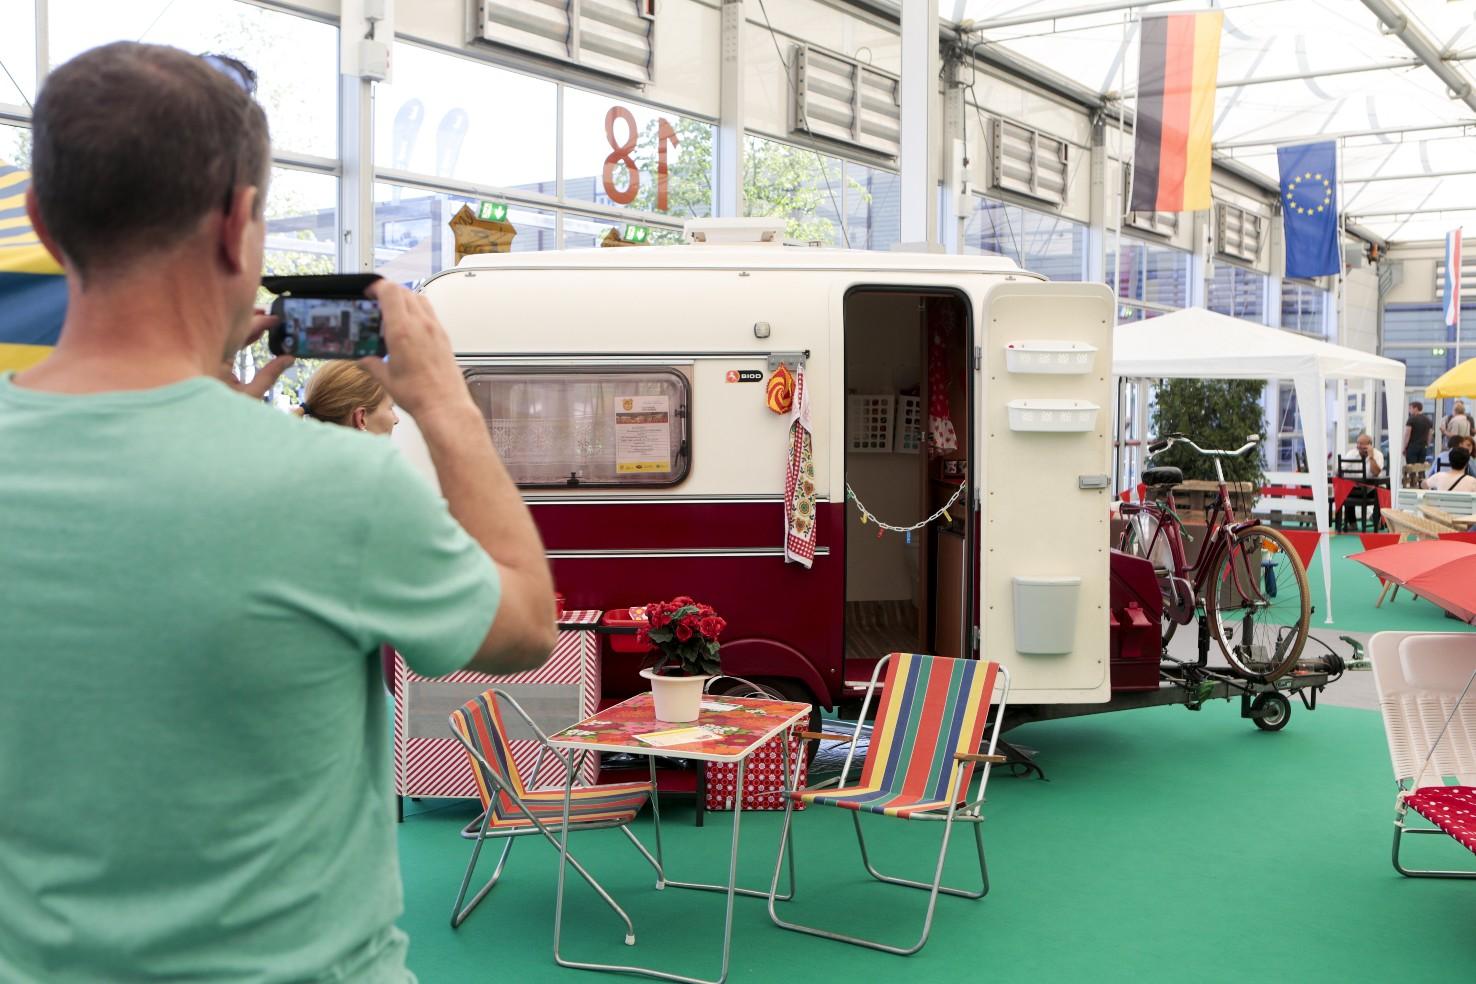 Not only new. Retro camping, from the Caravan Salon 2018 archive – image 4